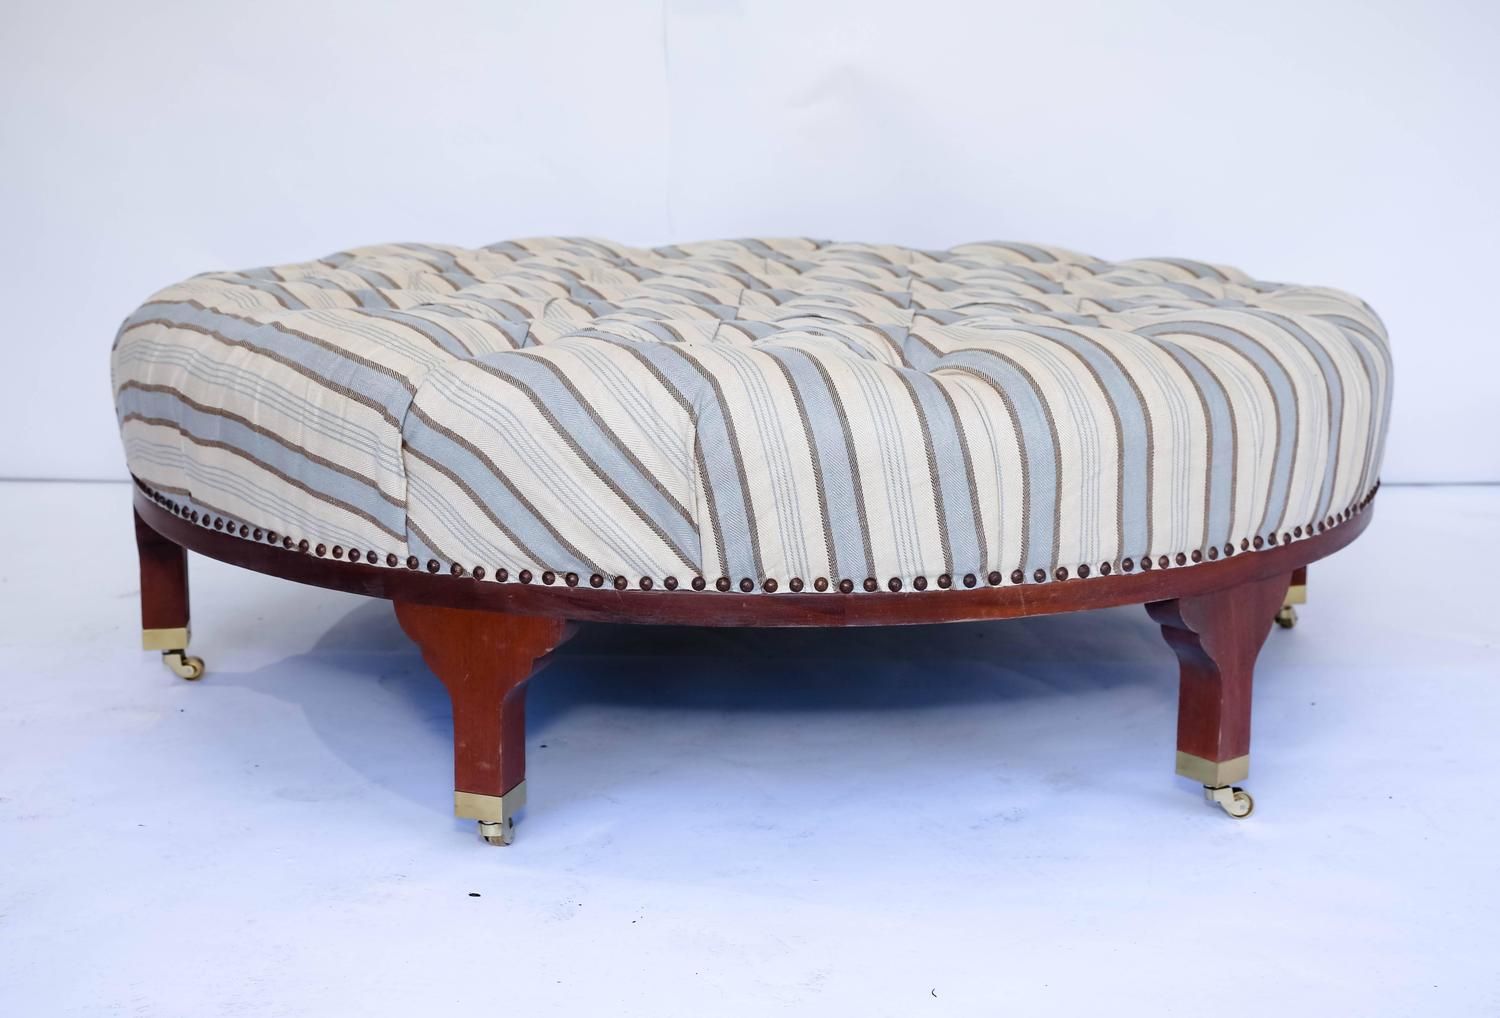 Large Round Tufted Ottoman With Striped Upholstery At 1stdibs With Regard To Round Pouf Ottomans (Gallery 19 of 20)